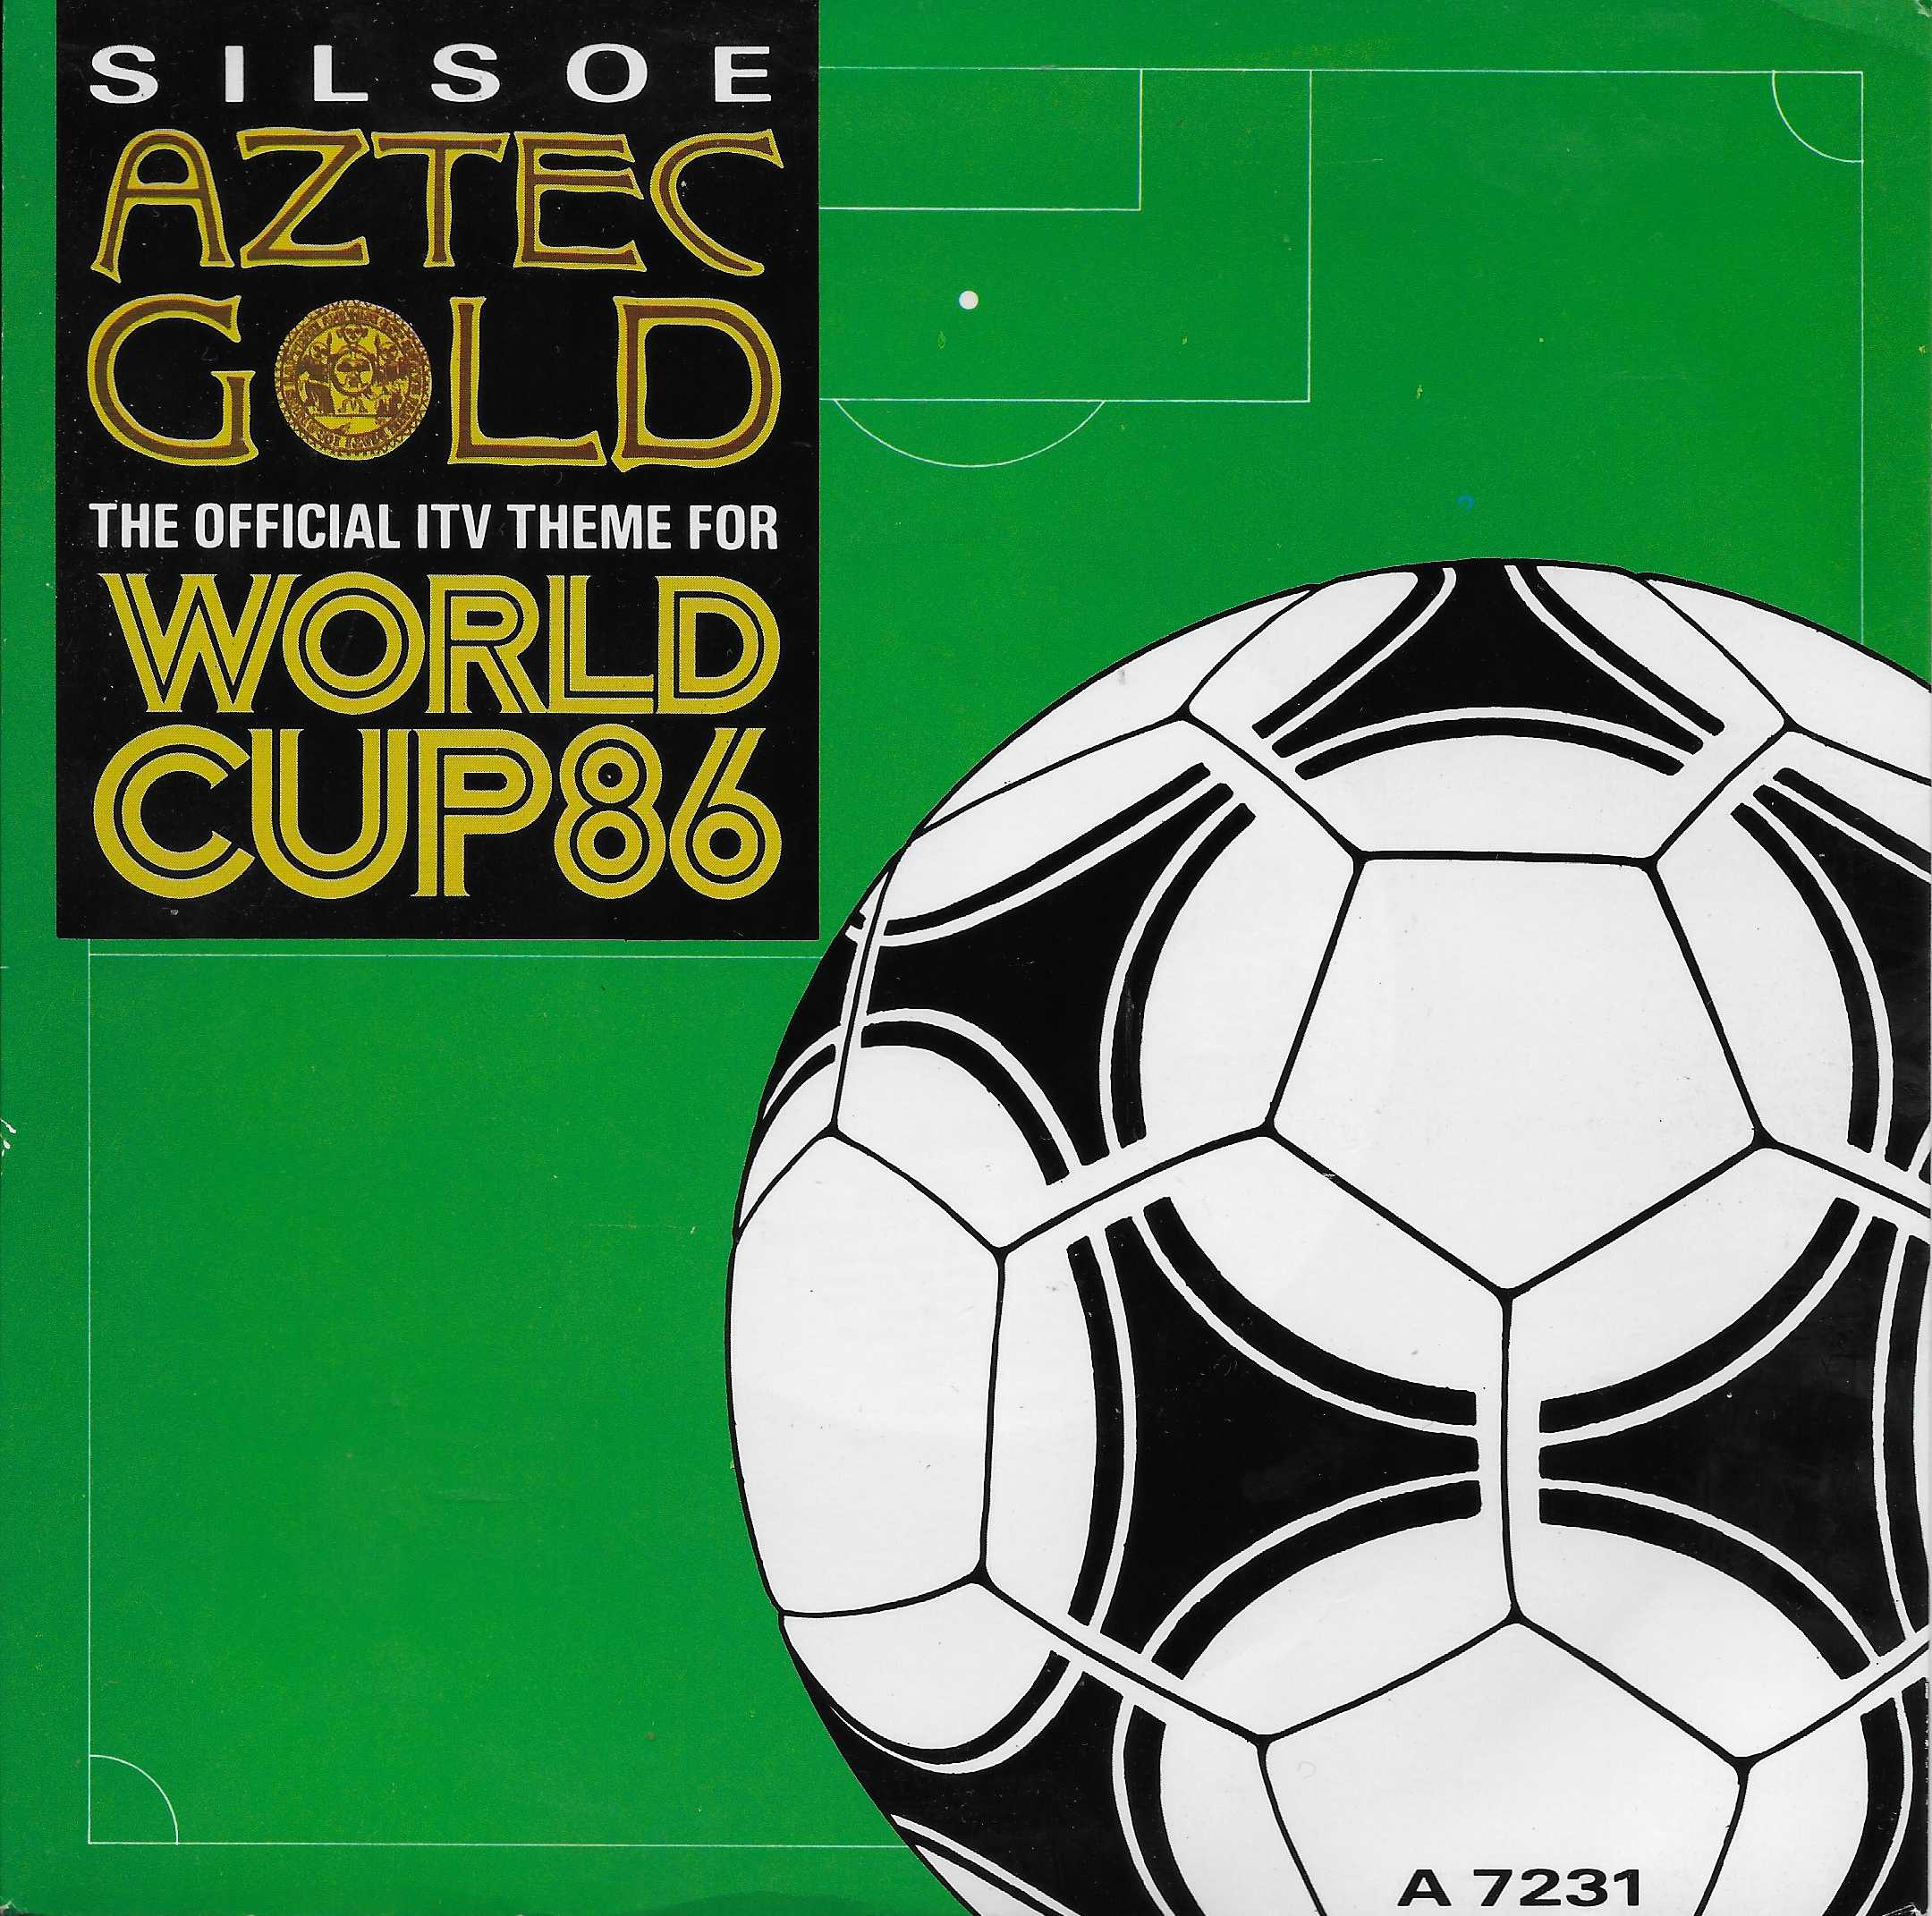 Picture of Aztec gold (ITV World Cup theme (1986)) by artist R. Argent / P. Van Hooke from ITV, Channel 4 and Channel 5 singles library